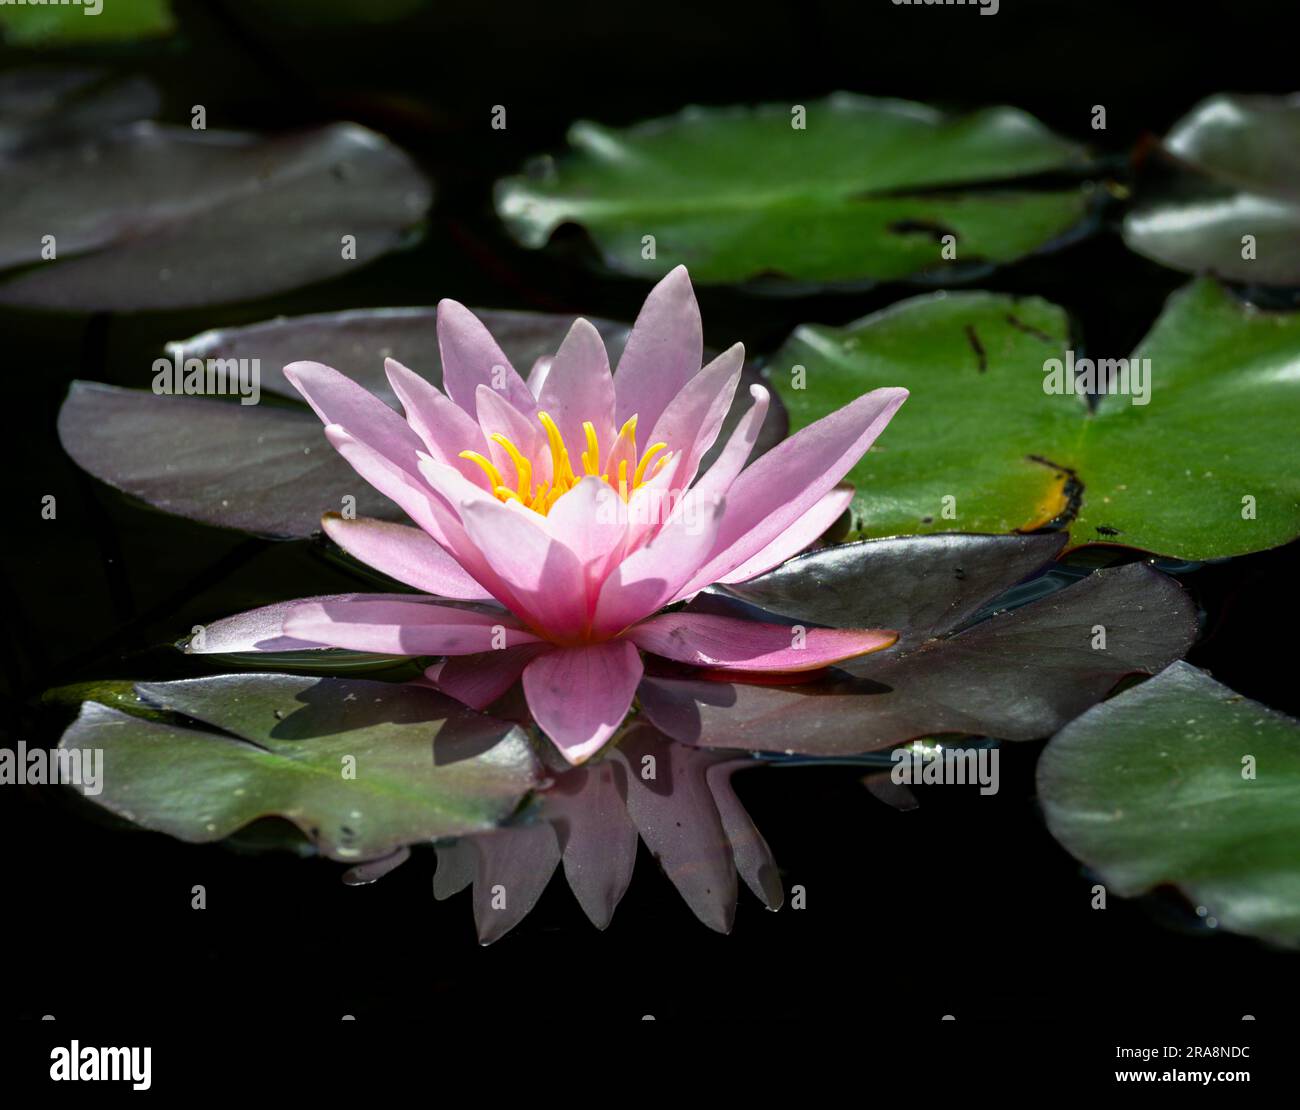 Closeup of a pink water lilly blossom in a pond Stock Photo